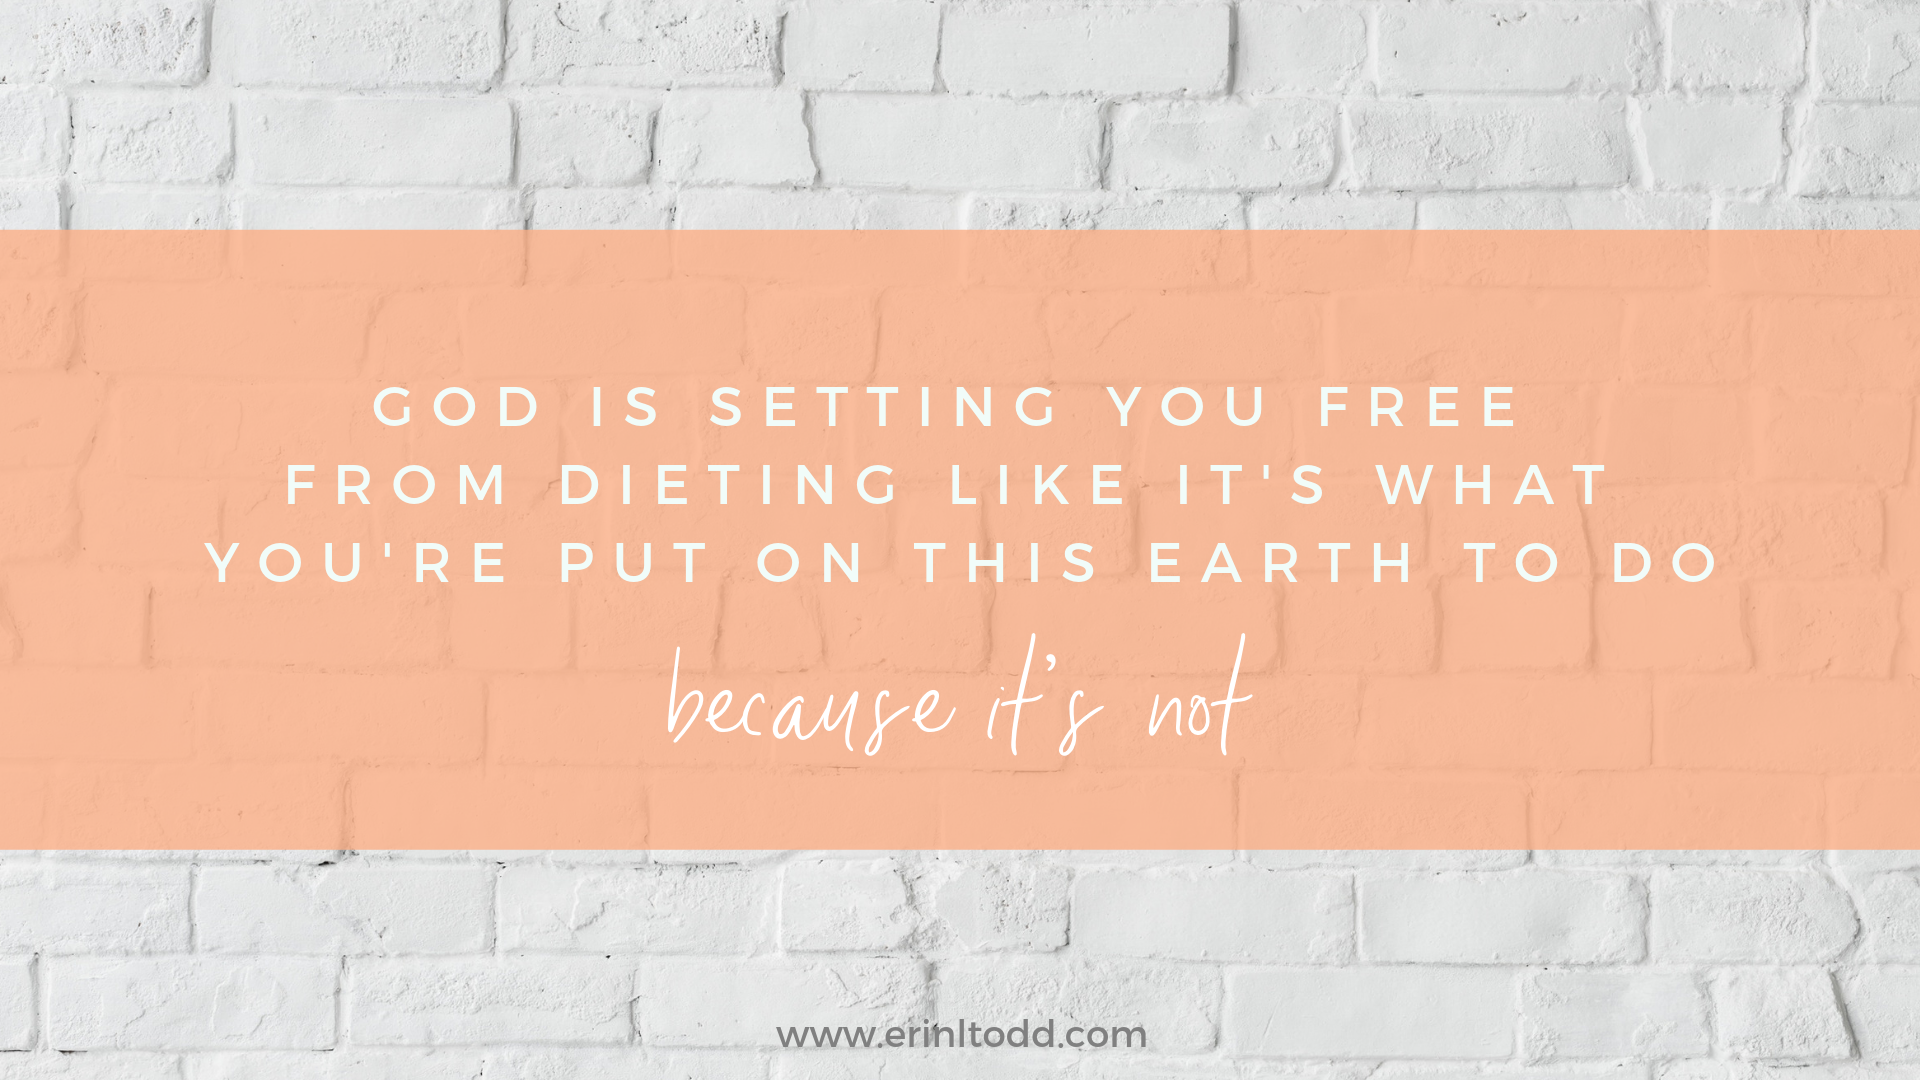 Don't let dieting distract you from your true purpose. Discover how the lies of diet culture are holding you back from your purpose. Recognize the false purpose of weight loss and trade it in for God’s true purpose for your life.